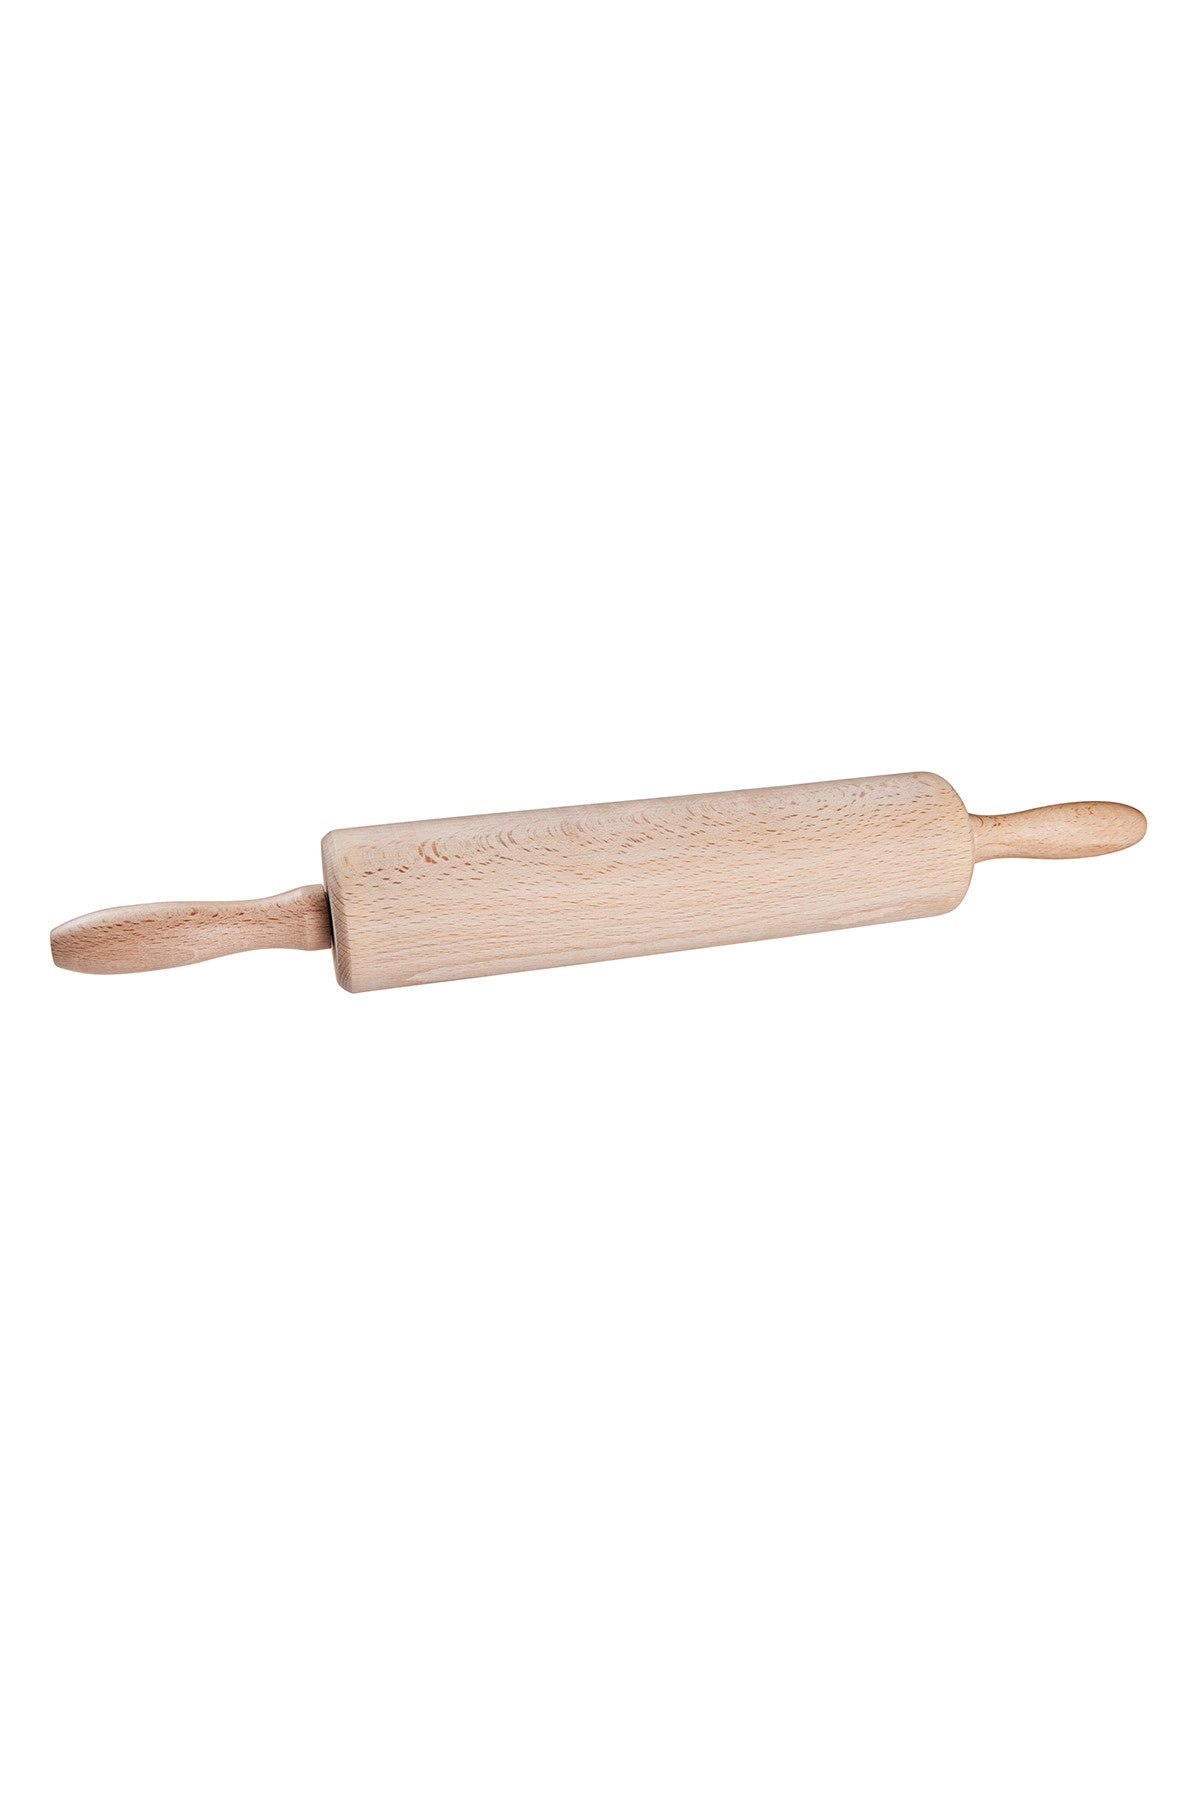 WOODEN ROLLING PIN 43 cm